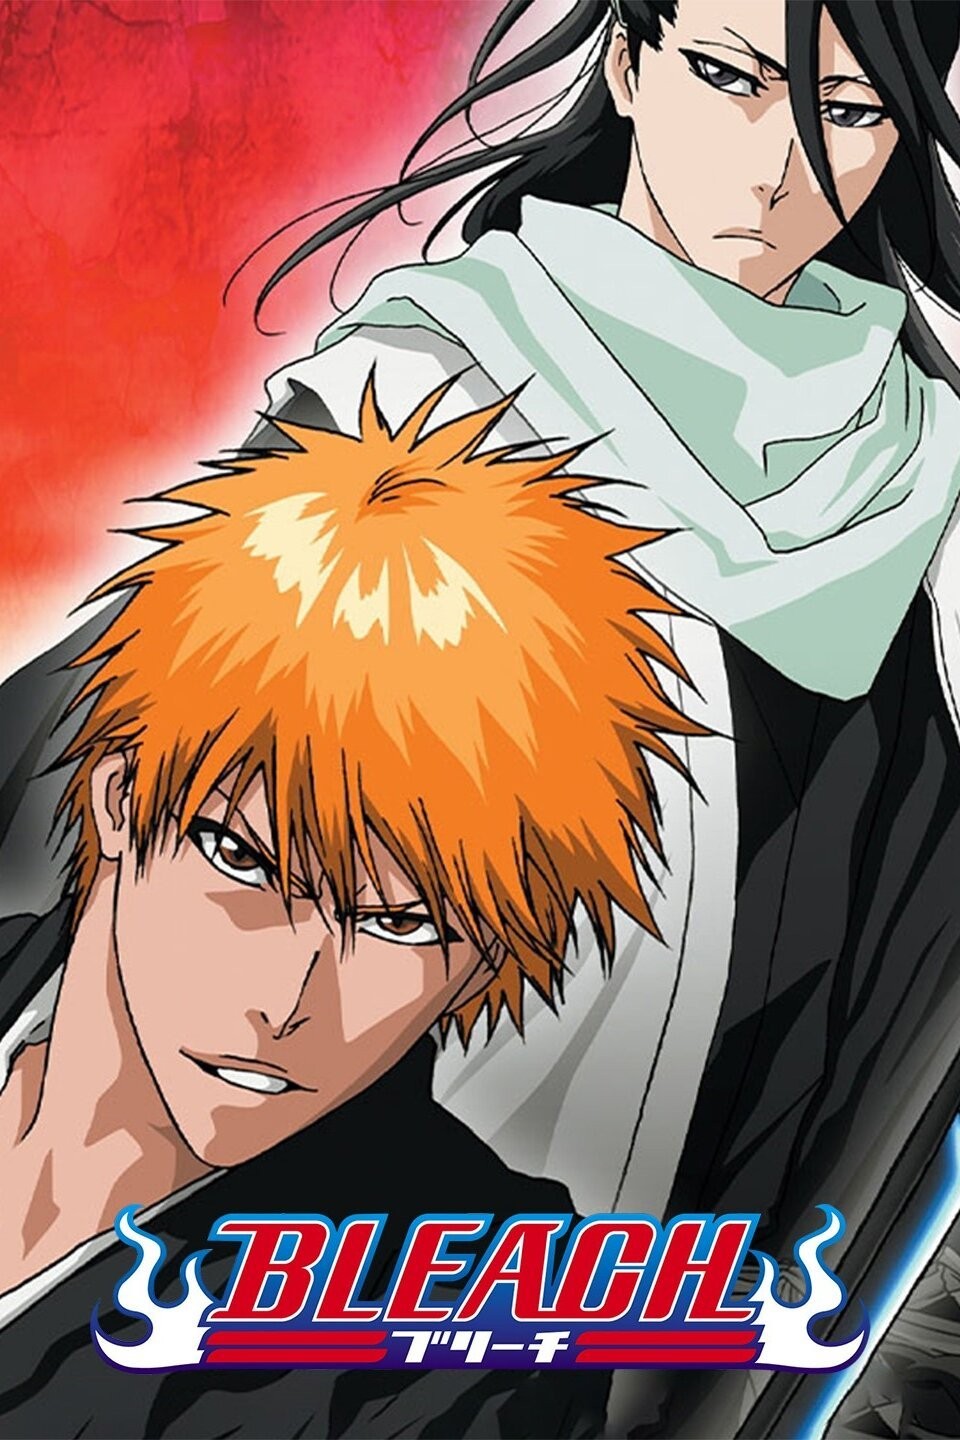 Bleach: Thousand-Year Blood War Returns for Part 2 in July